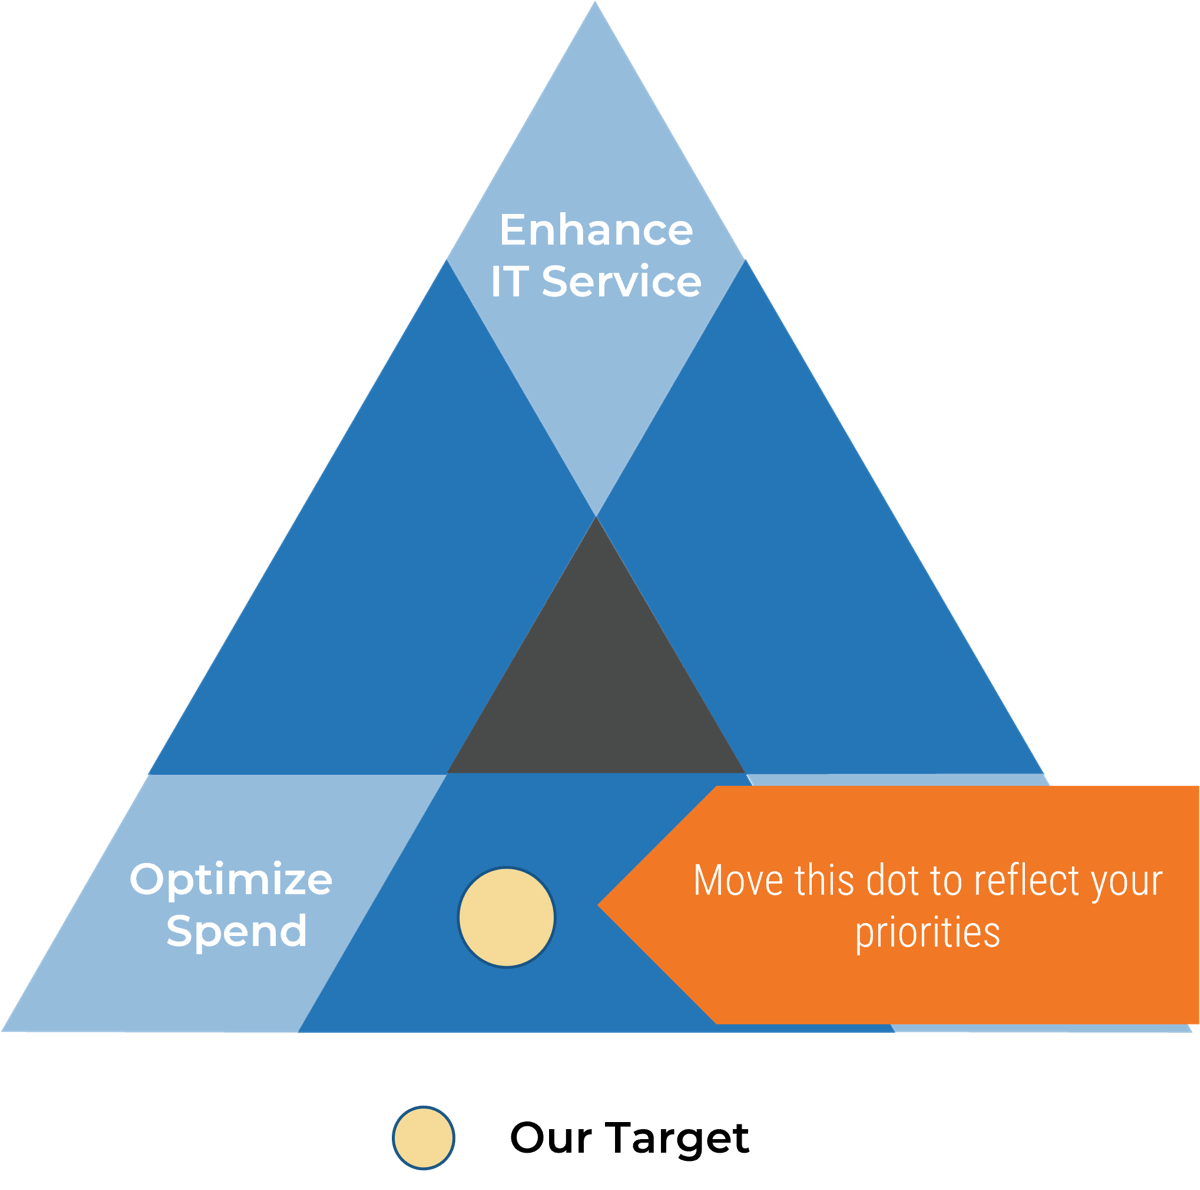 Triangle with the points labelled 'Enhance IT Service', 'Manage Risk', and 'Optimize Spend'. There is a dot close to the 'Optimize Spend' corner, a legend labelling the dot as 'Our Target', and a note reading 'Move this dot to reflect your priorities'.